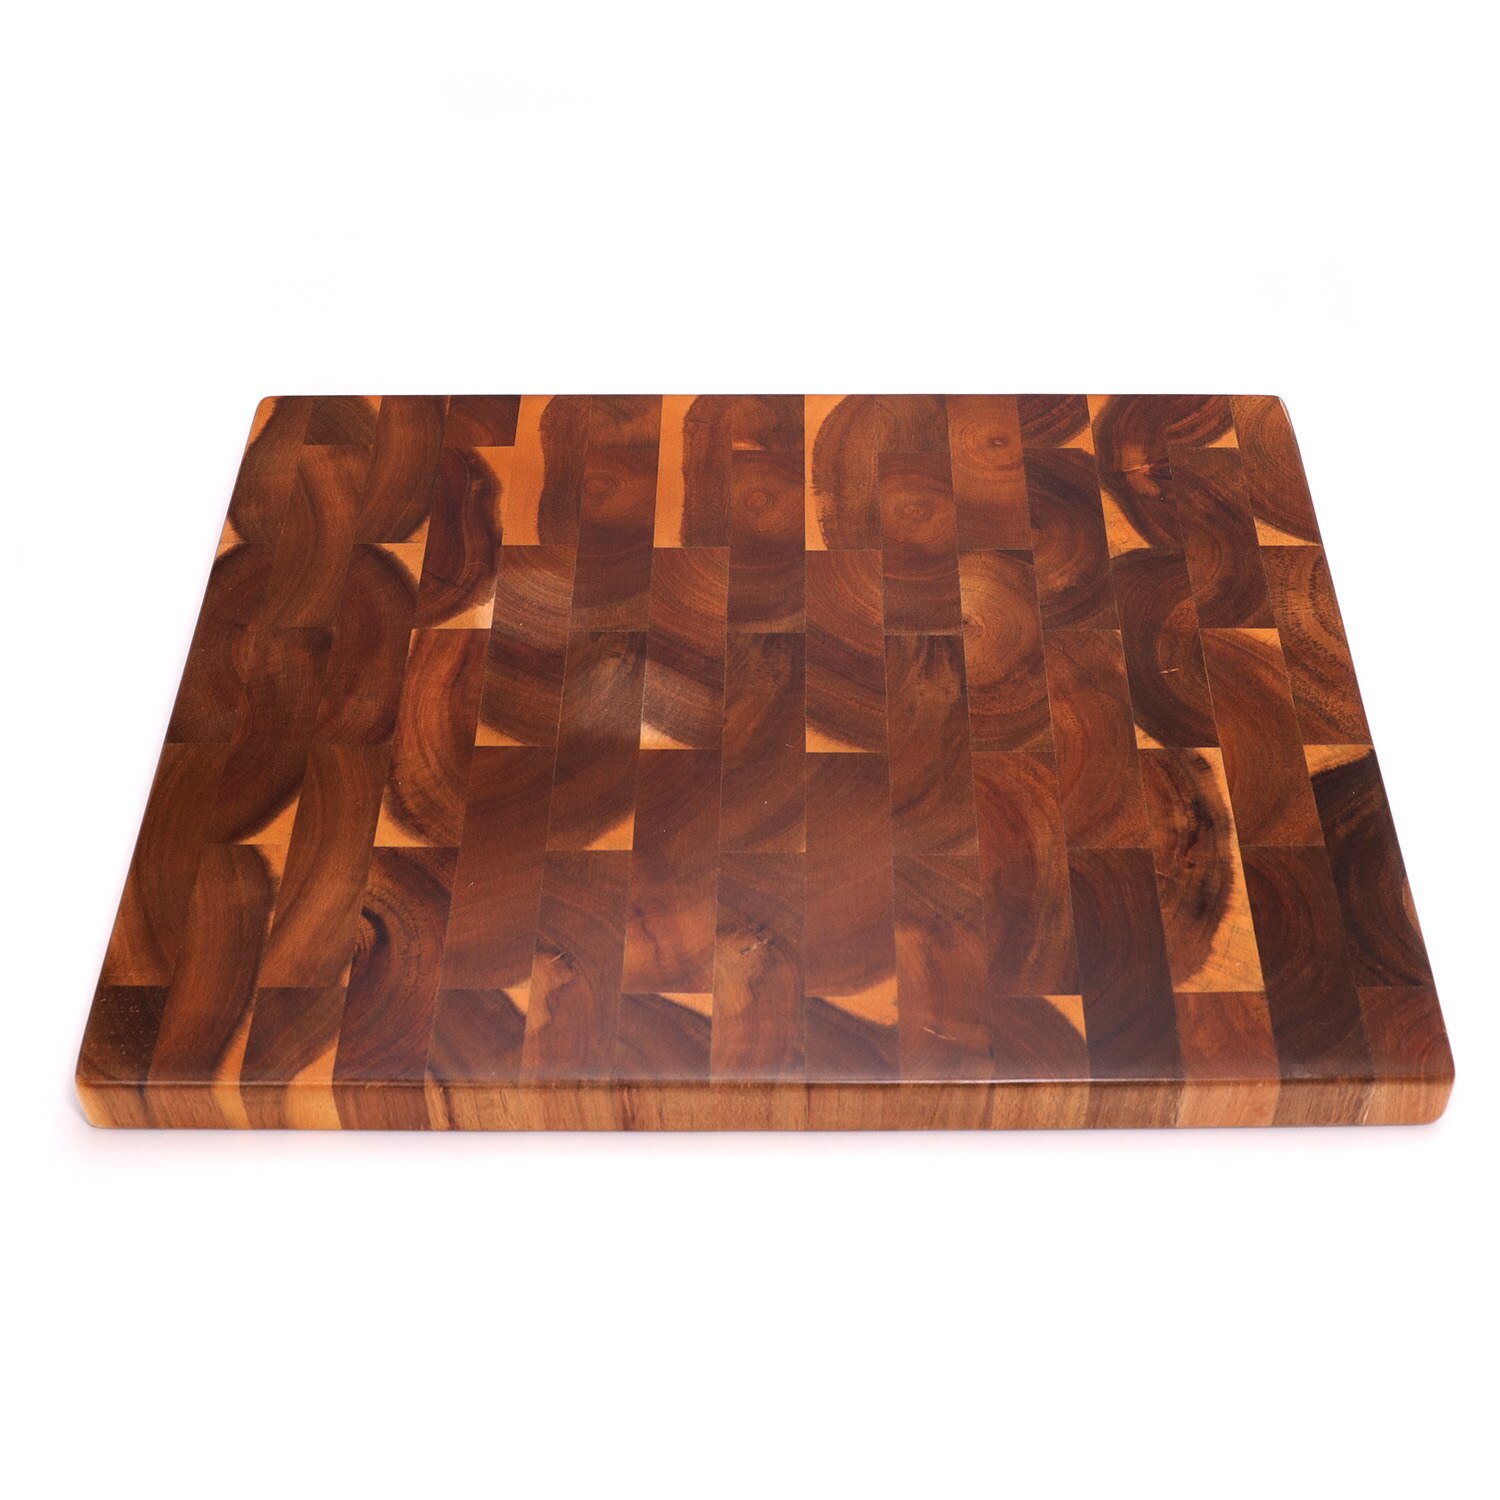 Acacia Wood Chopping Board with Juice Groove